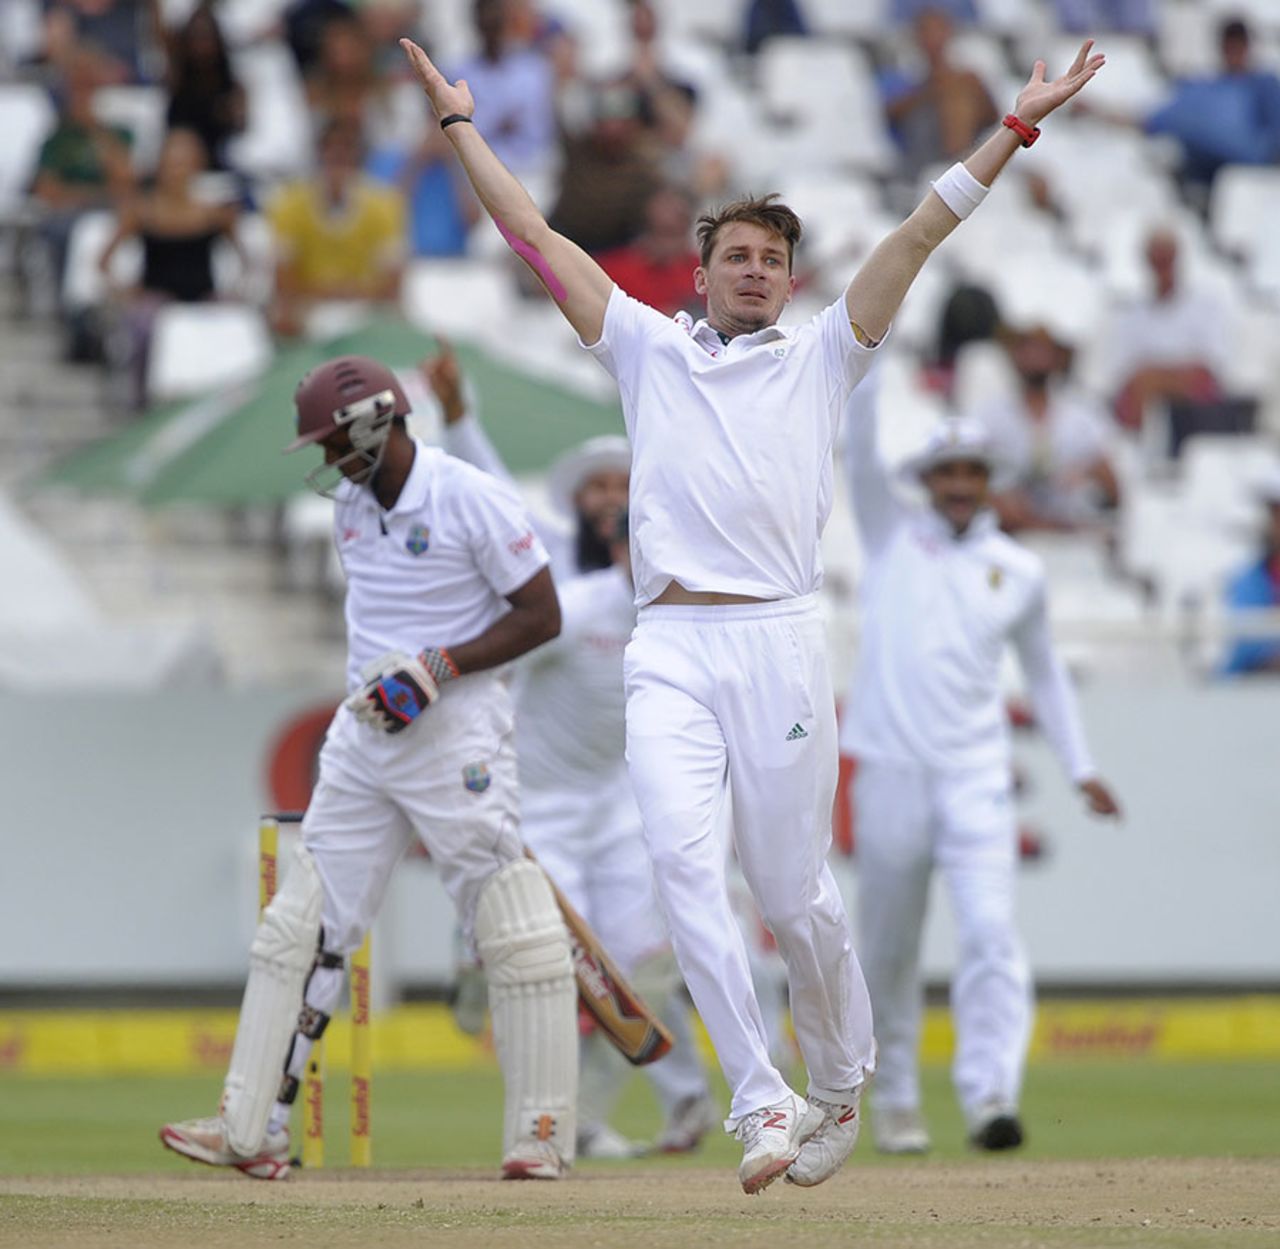 Dale Steyn had a caught behind appeal against Shivnarine Chanderpaul overturned on review, South Africa v West Indies, 3rd Test, Cape Town, 4th day, January 5, 2014